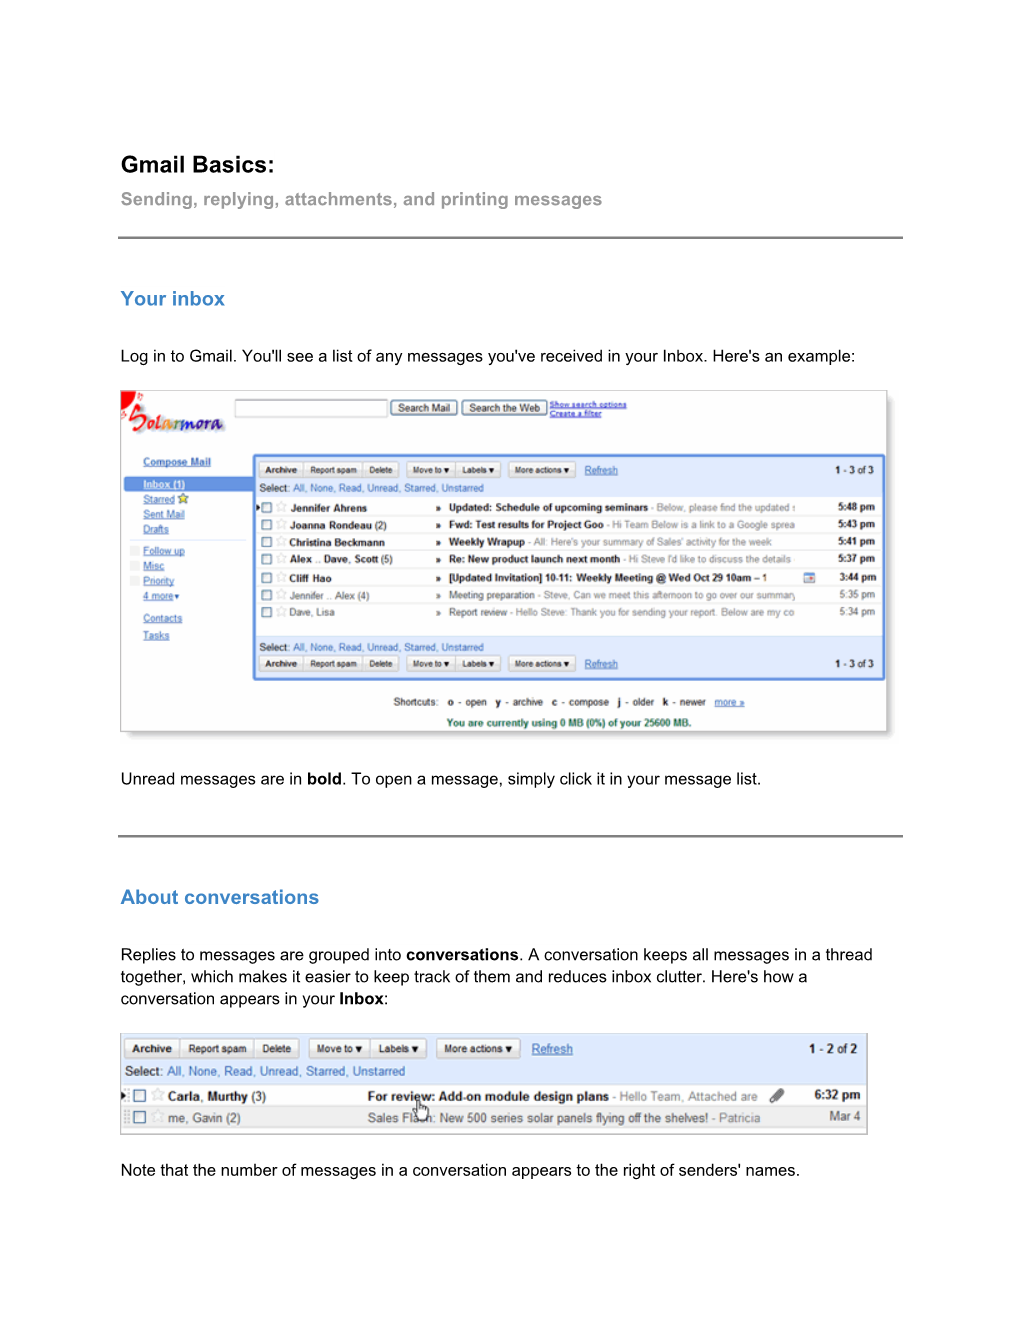 Gmail Basics: Sending, Replying, Attachments, and Printing Messages